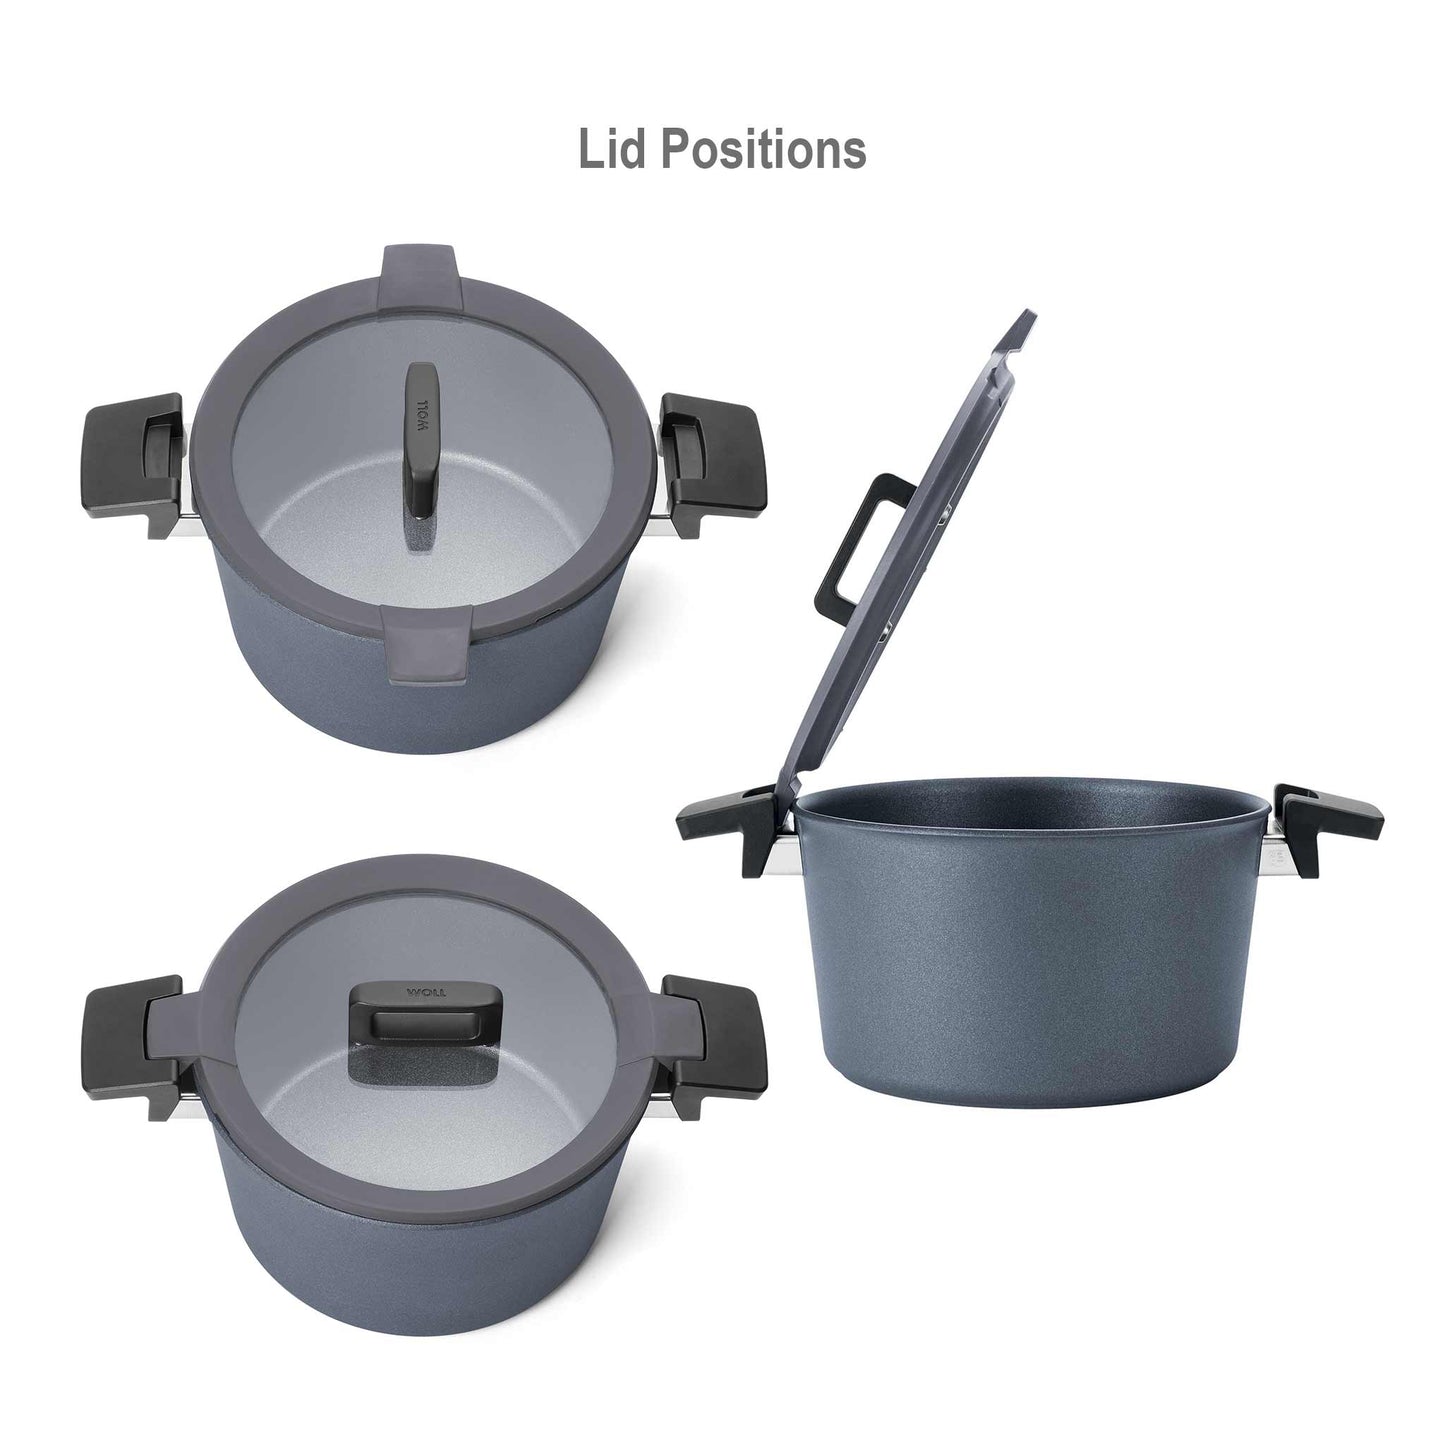 WOLL Concept Plus Pots with Multi-functional Steamer Insert